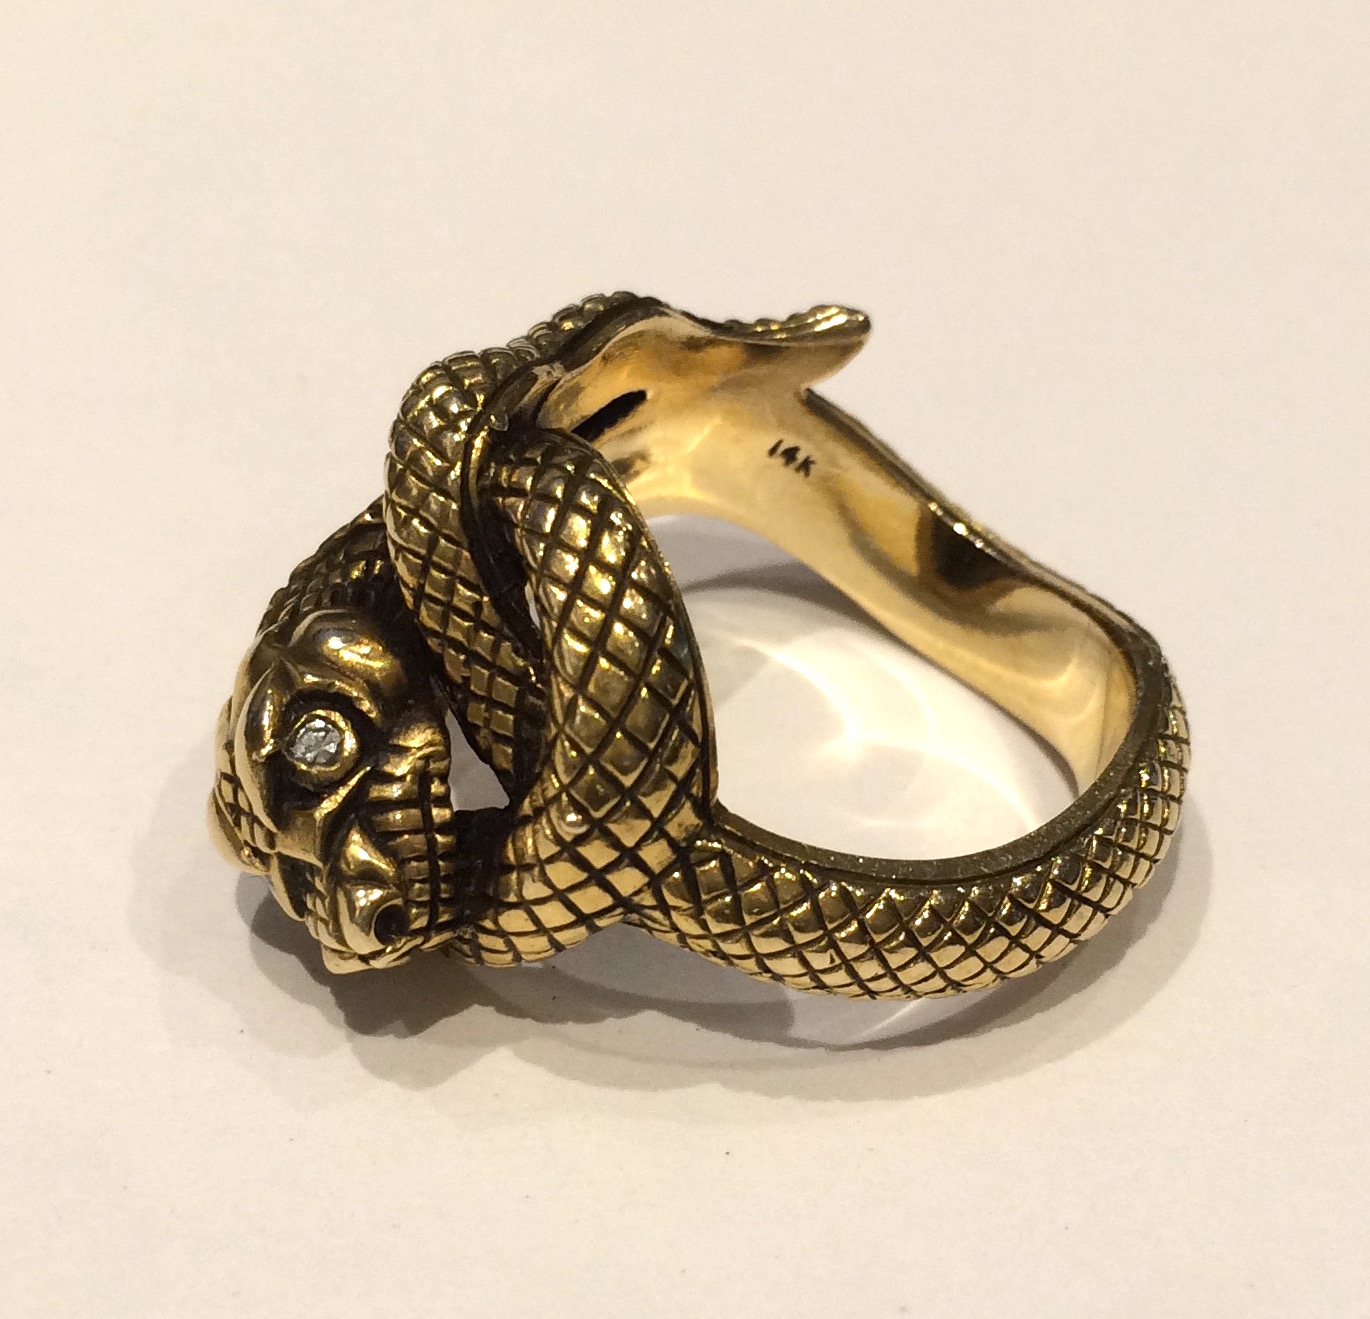 American “Coiled snake” ring, carved 14K gold with diamond eyes, marked, c. 1900